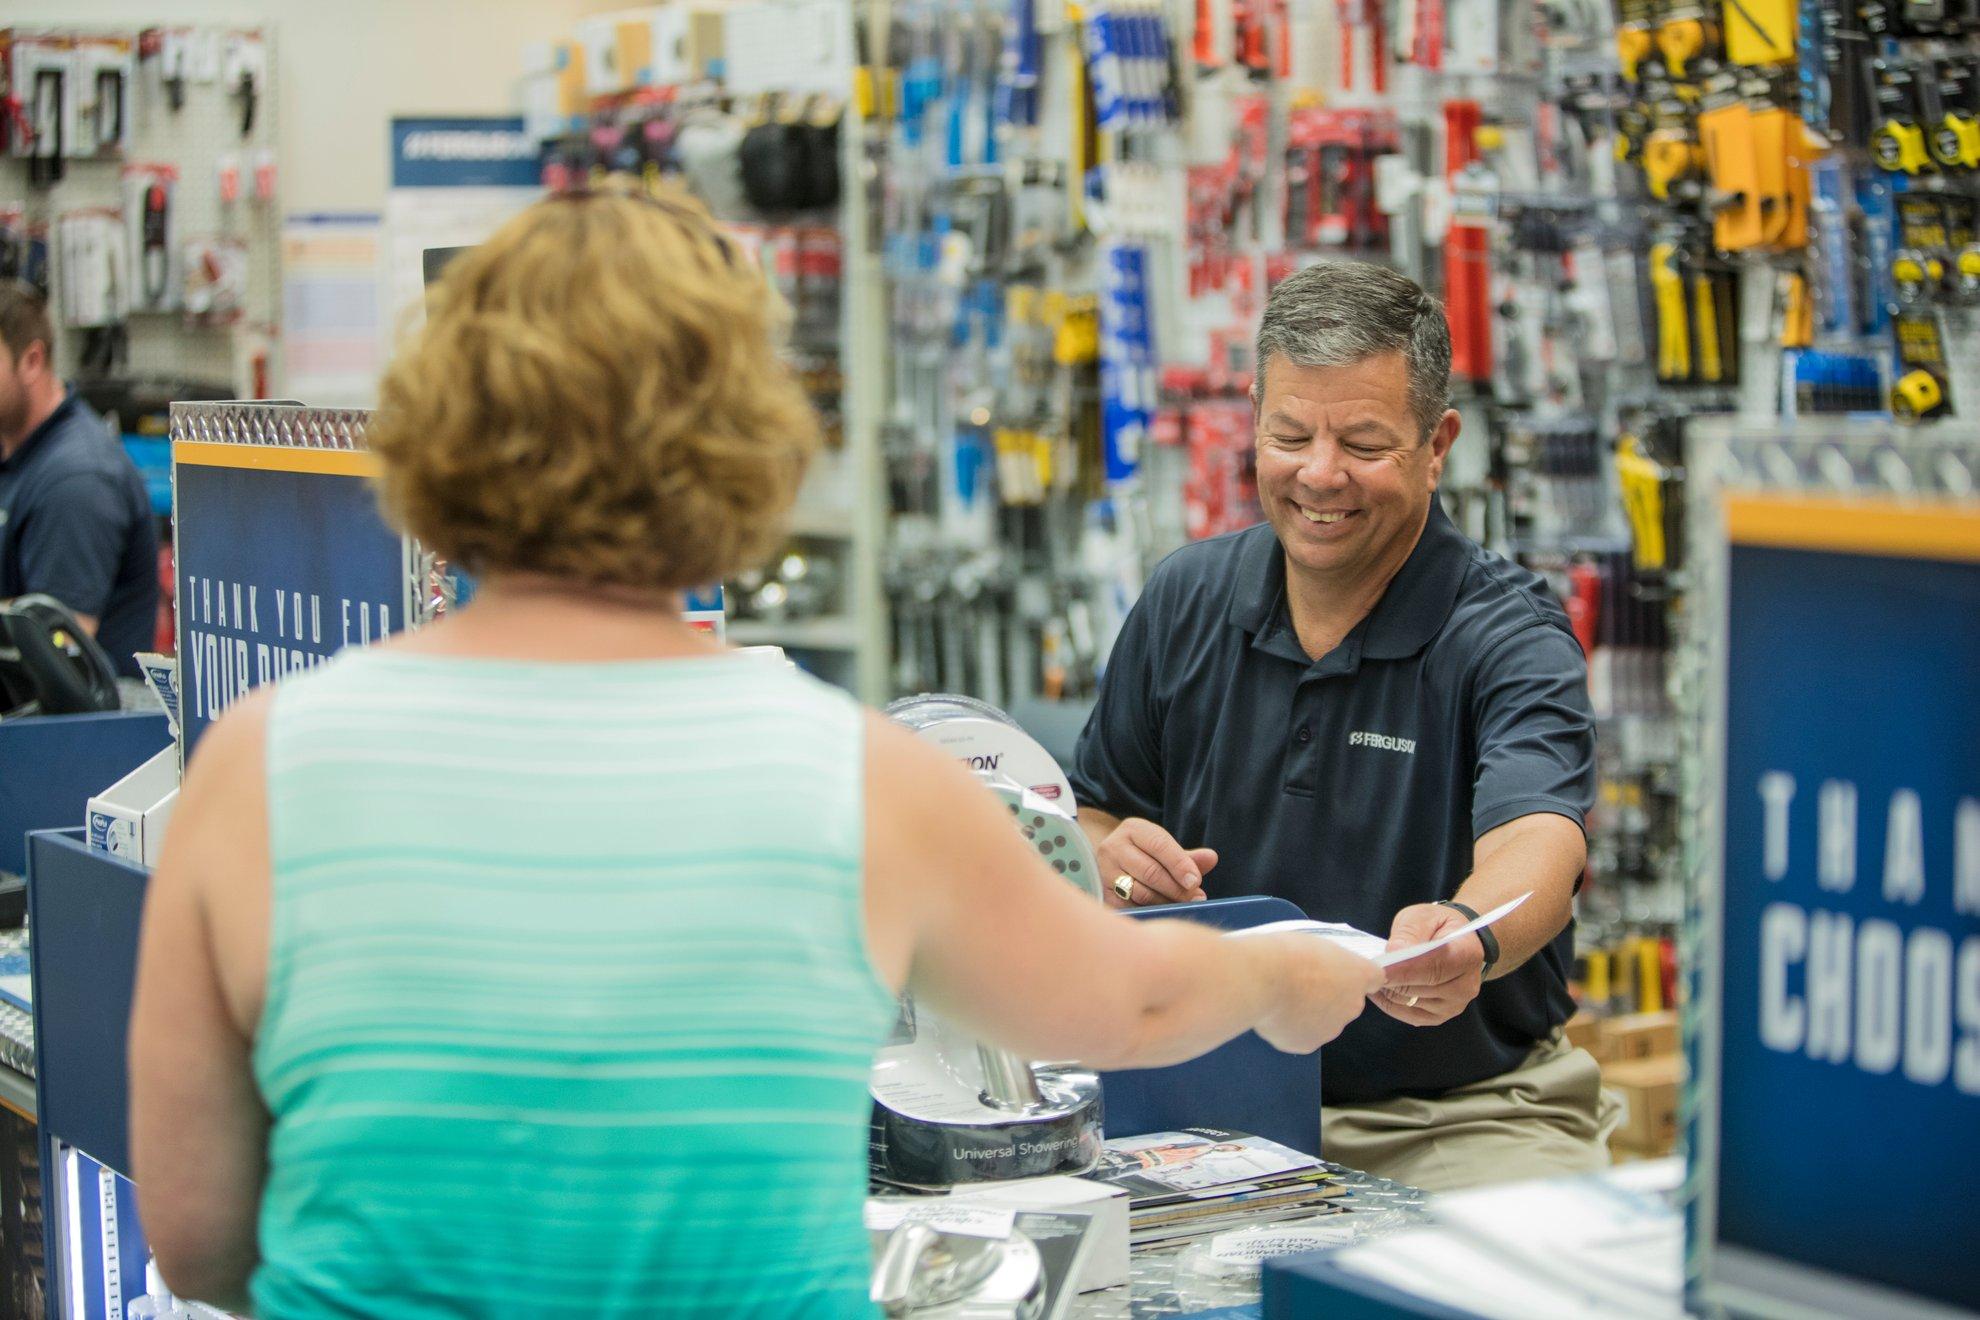 At a Ferguson counter location, a smiling associate behind the counter takes a piece of paper from a customer.